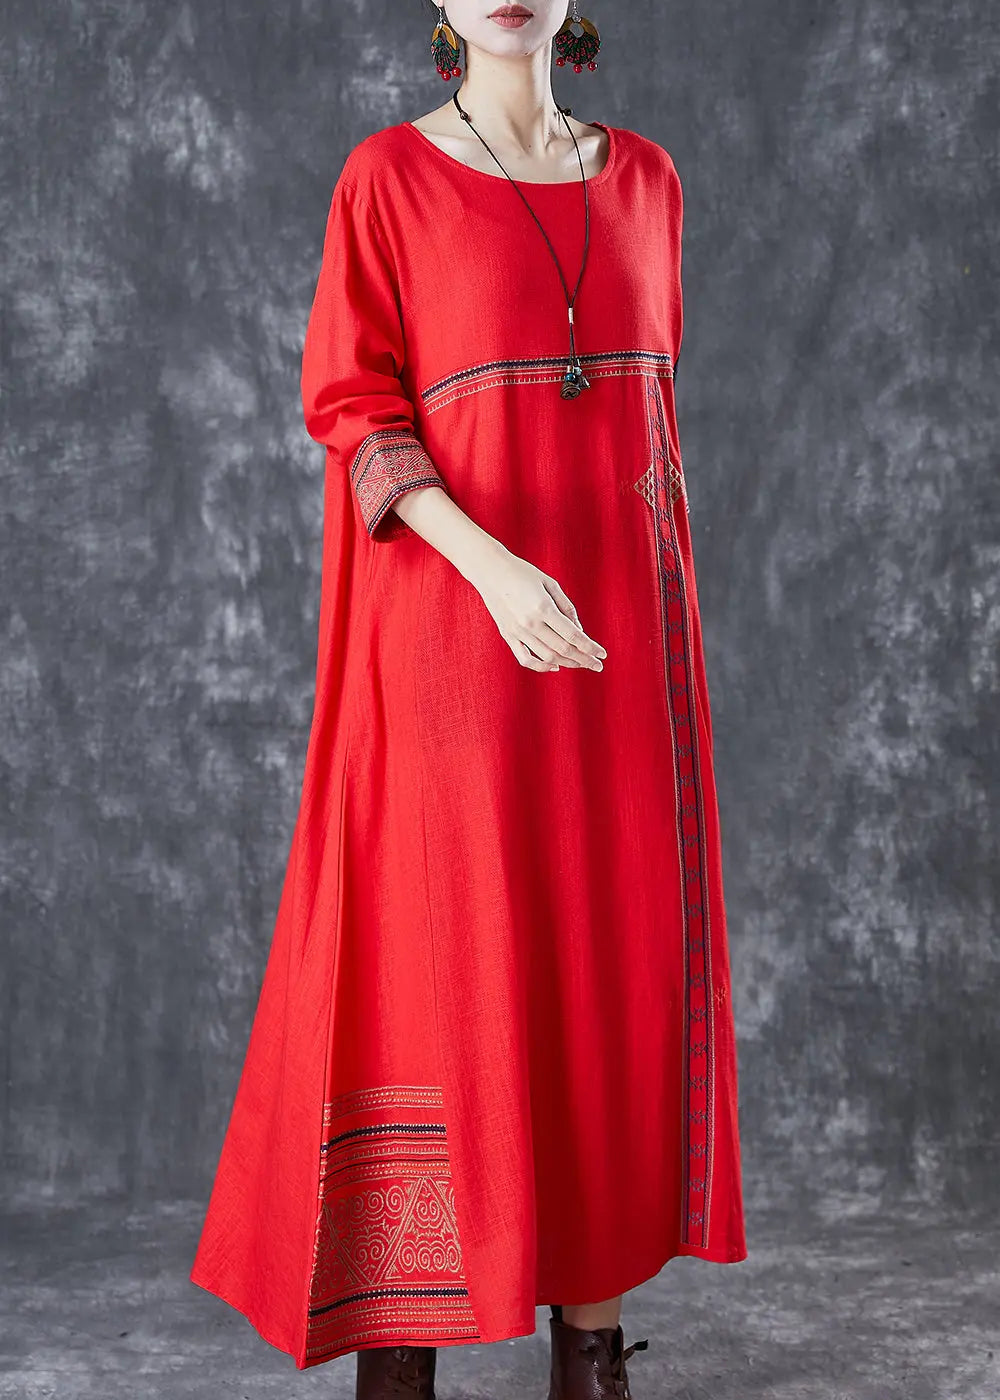 Red Patchwork Linen Maxi Dresses Embroidered Spring Ada Fashion